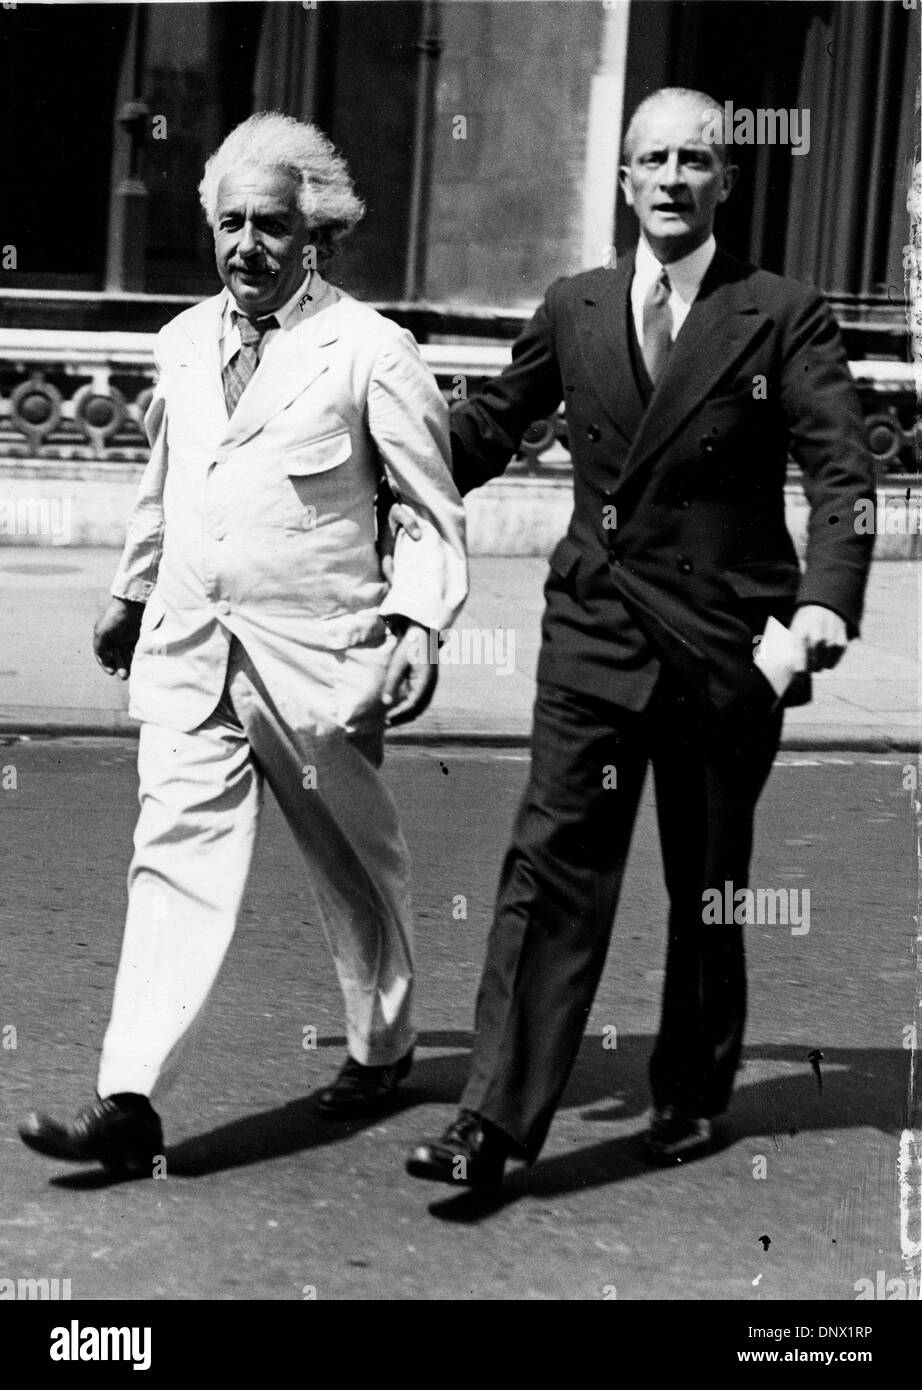 July 26, 1933 - London, England, U.K. - Professor ALBERT EINSTEIN walking with Commander LOCKER LAMPSON. Einstein (March 14, 1879 Ð April 18, 1955) was a German theoretical physicist regarded as the greatest scientist of the 20th century. He proposed the theory of relativity and made contributions to the development of quantum mechanics, statistical mechanics, and cosmology. (Credi Stock Photo